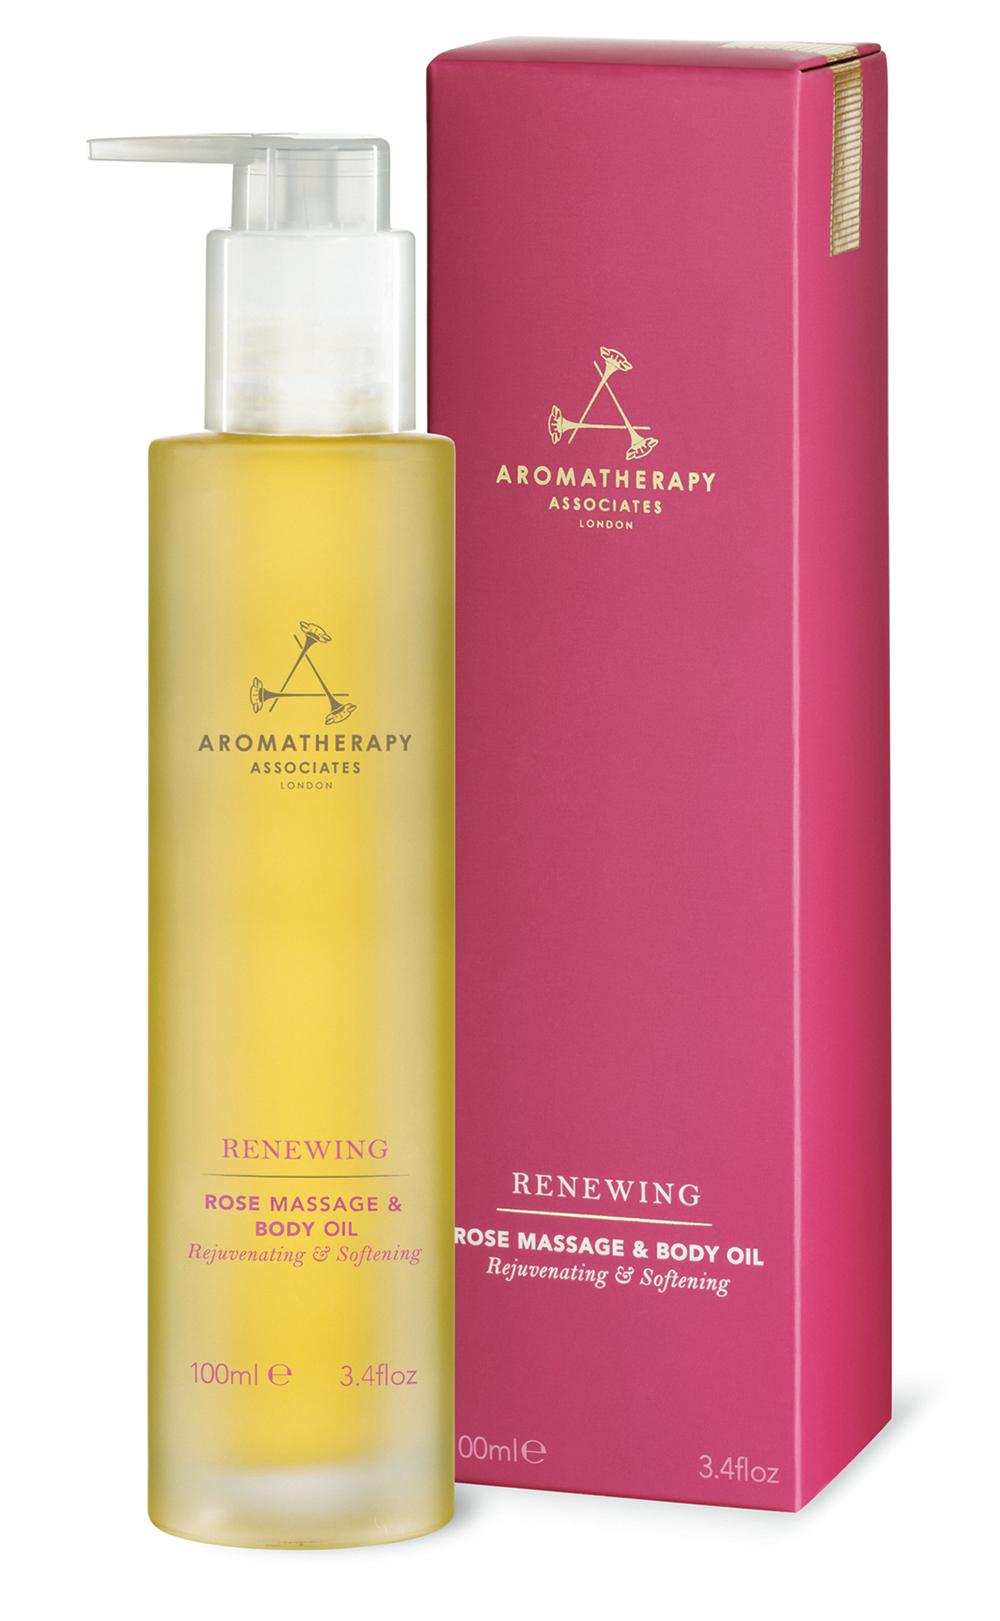 Facial products usually dominate retail sales, but at Aromatherapy Associates, body products are top sellers too